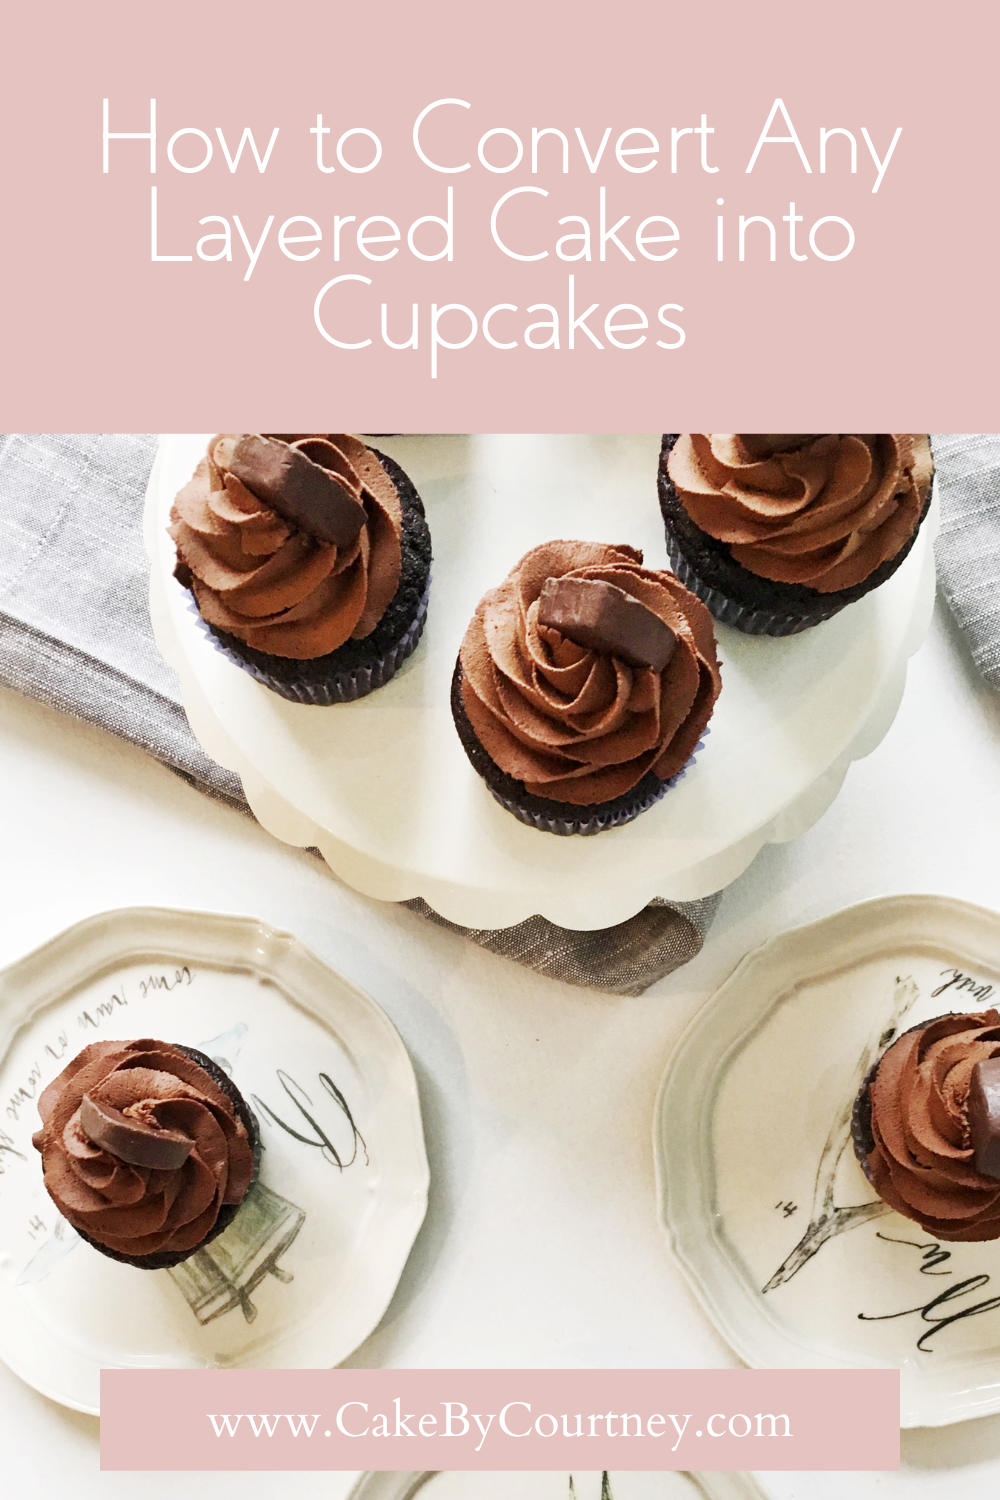 the best way to convert layered cake into cupcakes. www.cakebycourtney.com